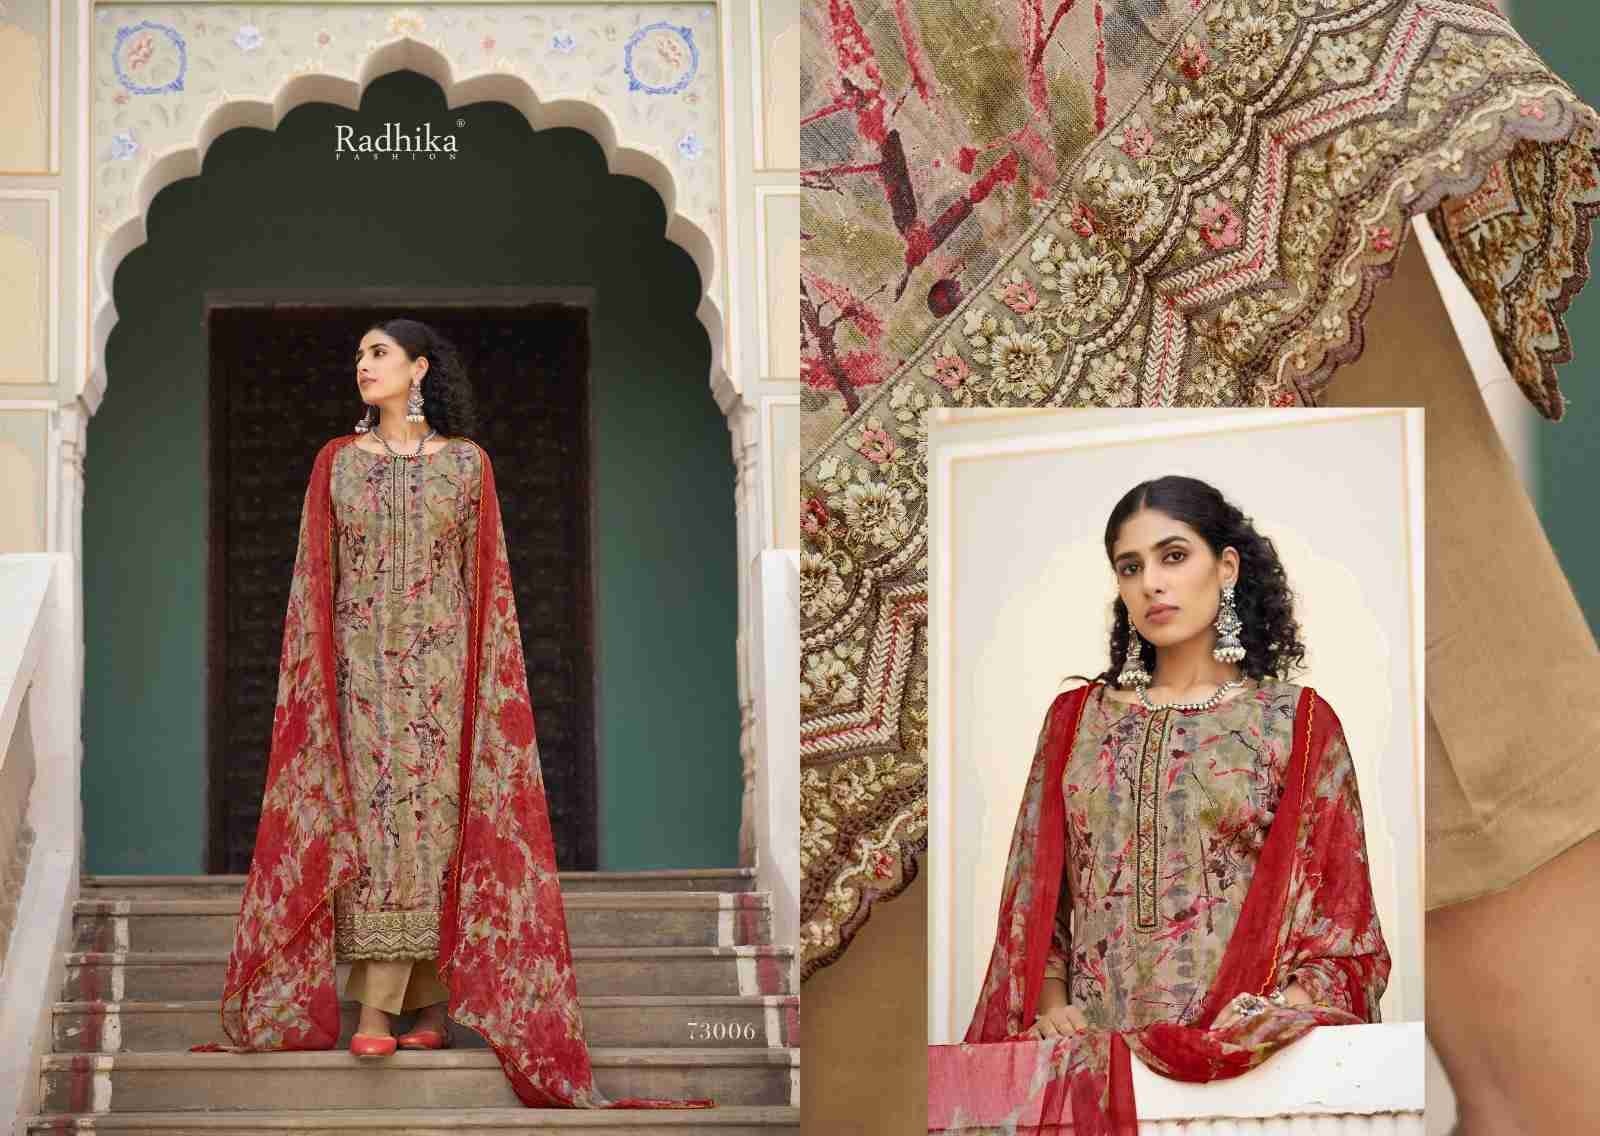 Naira Vol-2 By Azara 73001 To 73006 Series Beautiful Pakistani Suits Colorful Stylish Fancy Casual Wear Cotton Print Embroidered Dresses At Wholesale Price